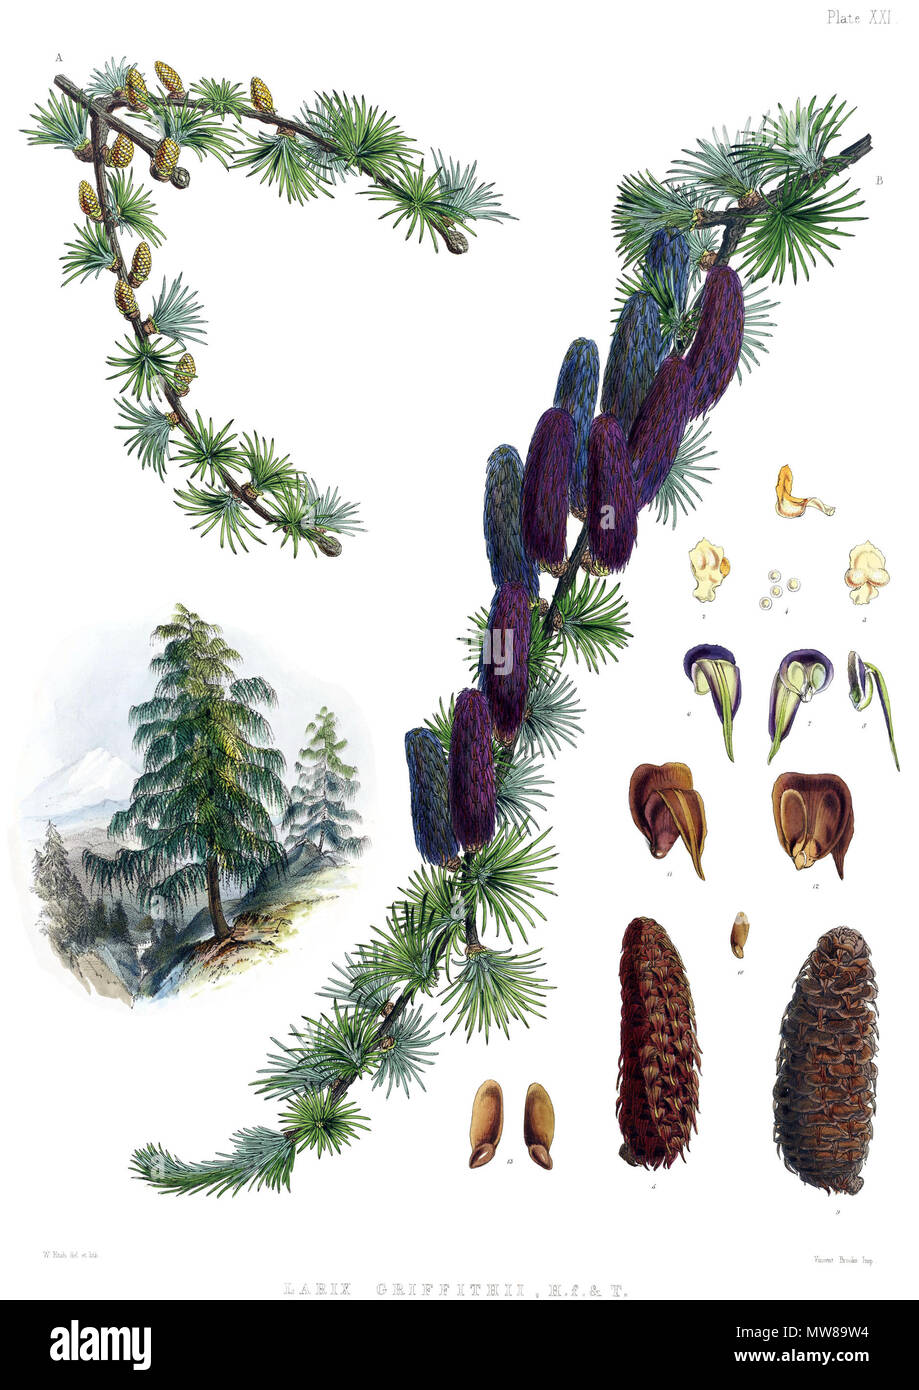 . Larix griffithii. Original caption: 'Plate XXI. A. Male branch. B. Female branch. Fig. 1, 2, 3. Anthers. 4. Pollen. 5. Young cone. 6, 7, 8. Scales and bracts. 9. Ripe cone. 10, 11. Its scales and bracts. 12. Ripe seeds. 13. The same :—all (but 5, 9, and 12) more or less magnified. Published 1855. Cathcart, John Fergusson (1802 - 1851) 359 Larix griffithii Stock Photo